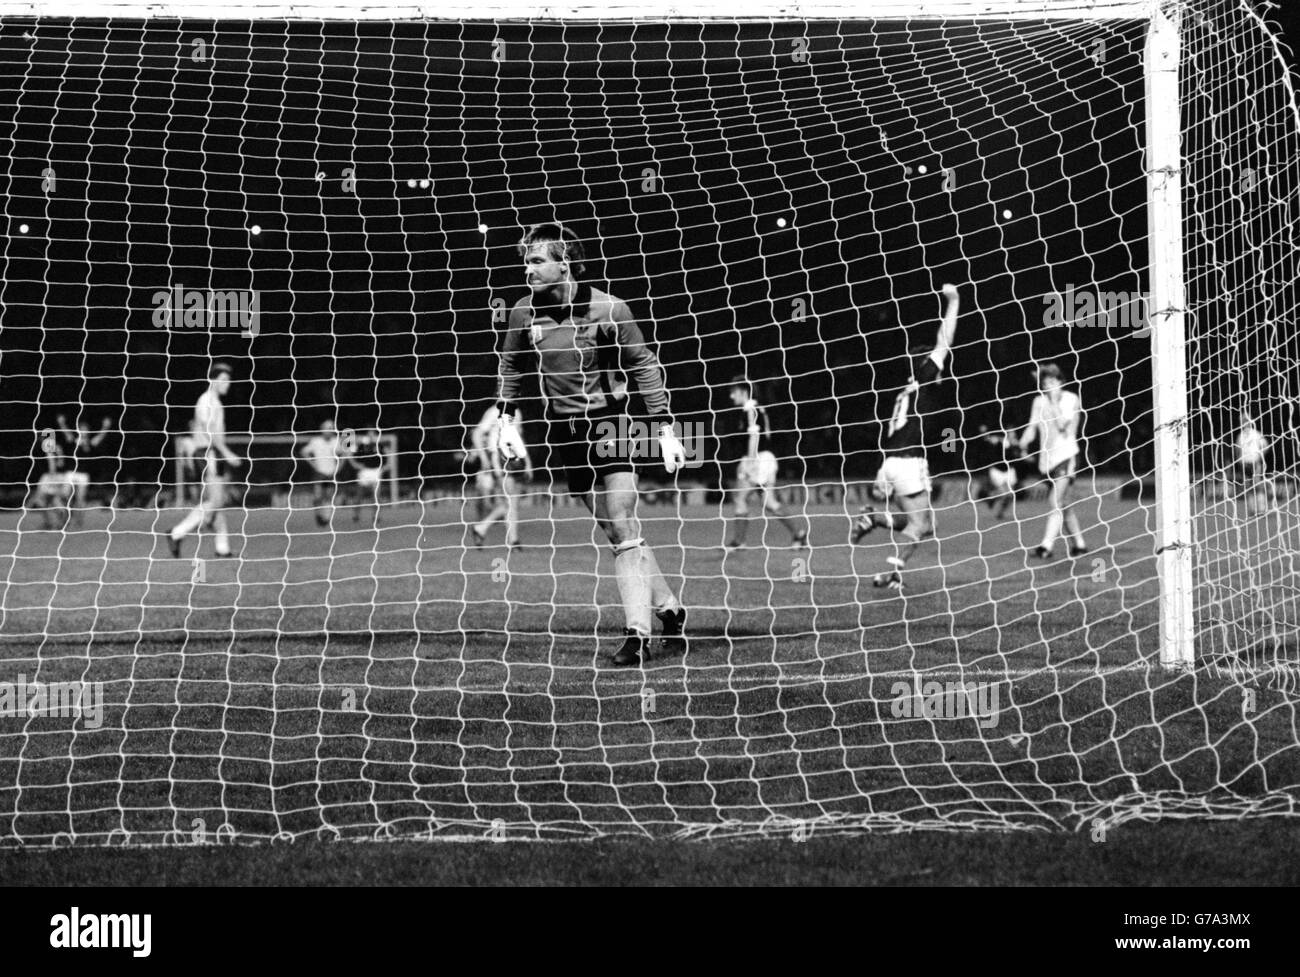 John Robertson turns away, arm raised in salute after scoring Scotland's second goal from a penalty during the World Cup qualifying match against Sweden at Hampden park. Scotland won 2-0, with Joe Jordan scoring the first goal. Stock Photo